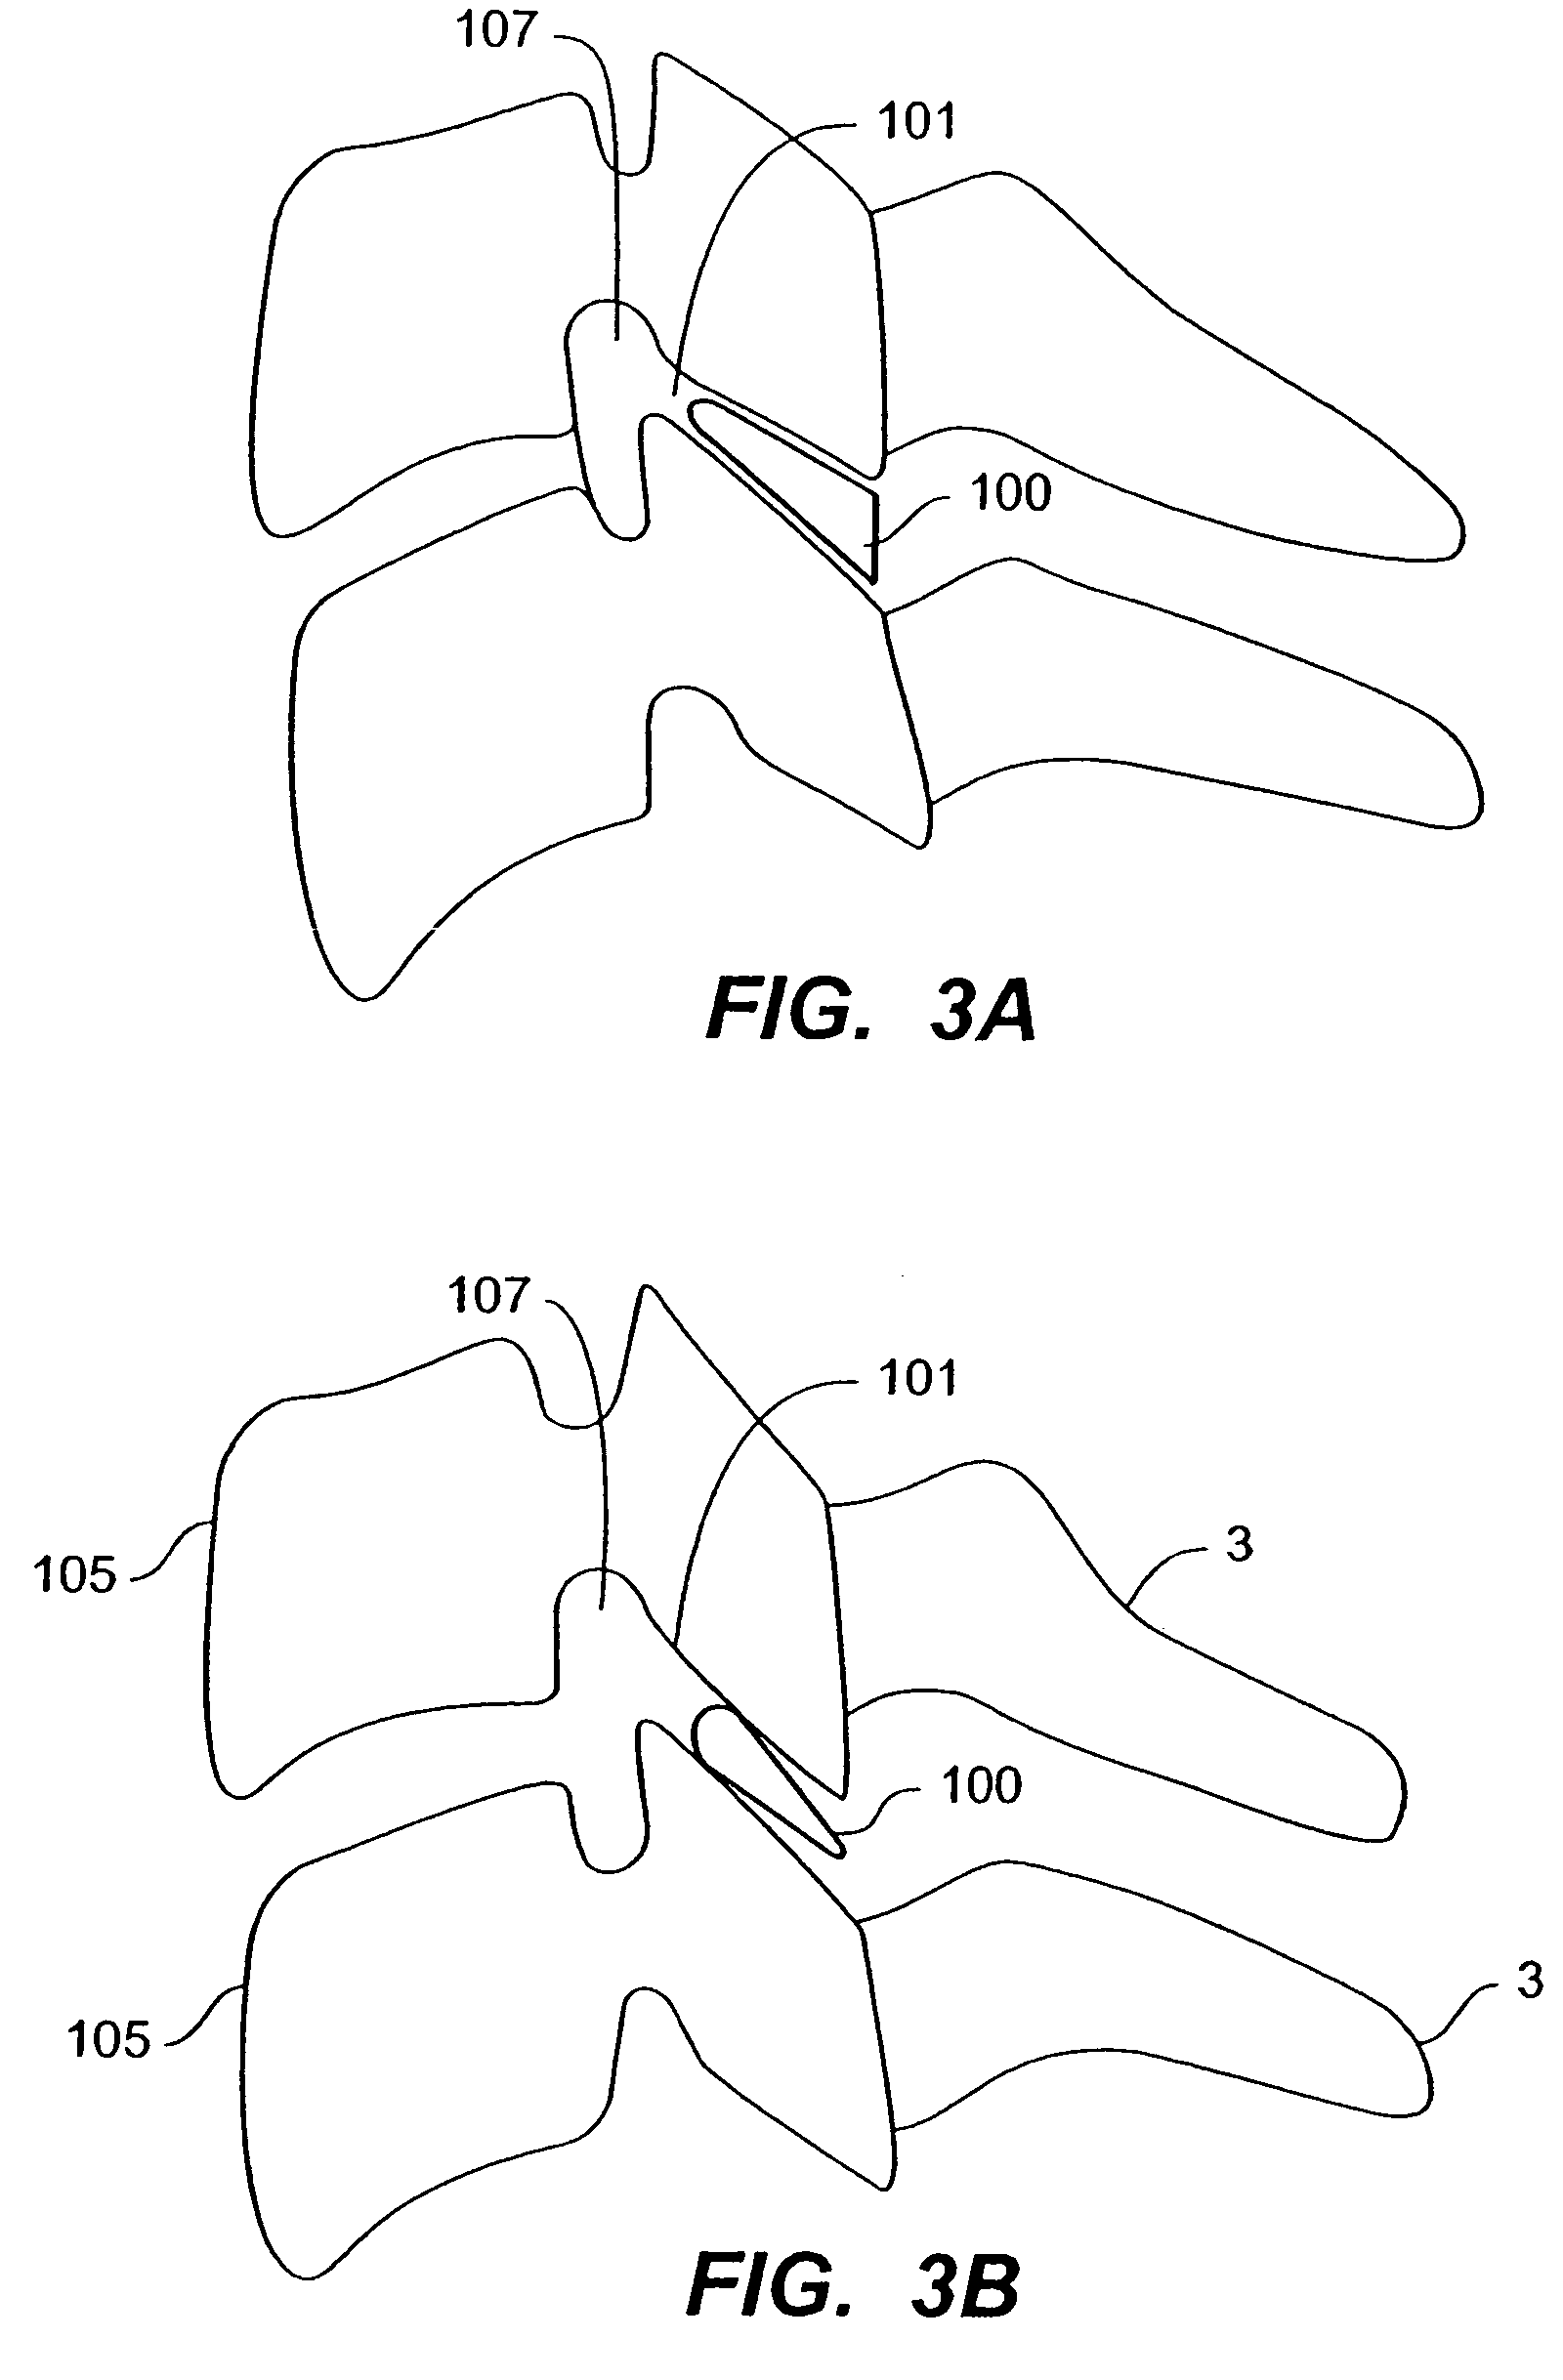 Inter-cervical facet implant with surface enhancements